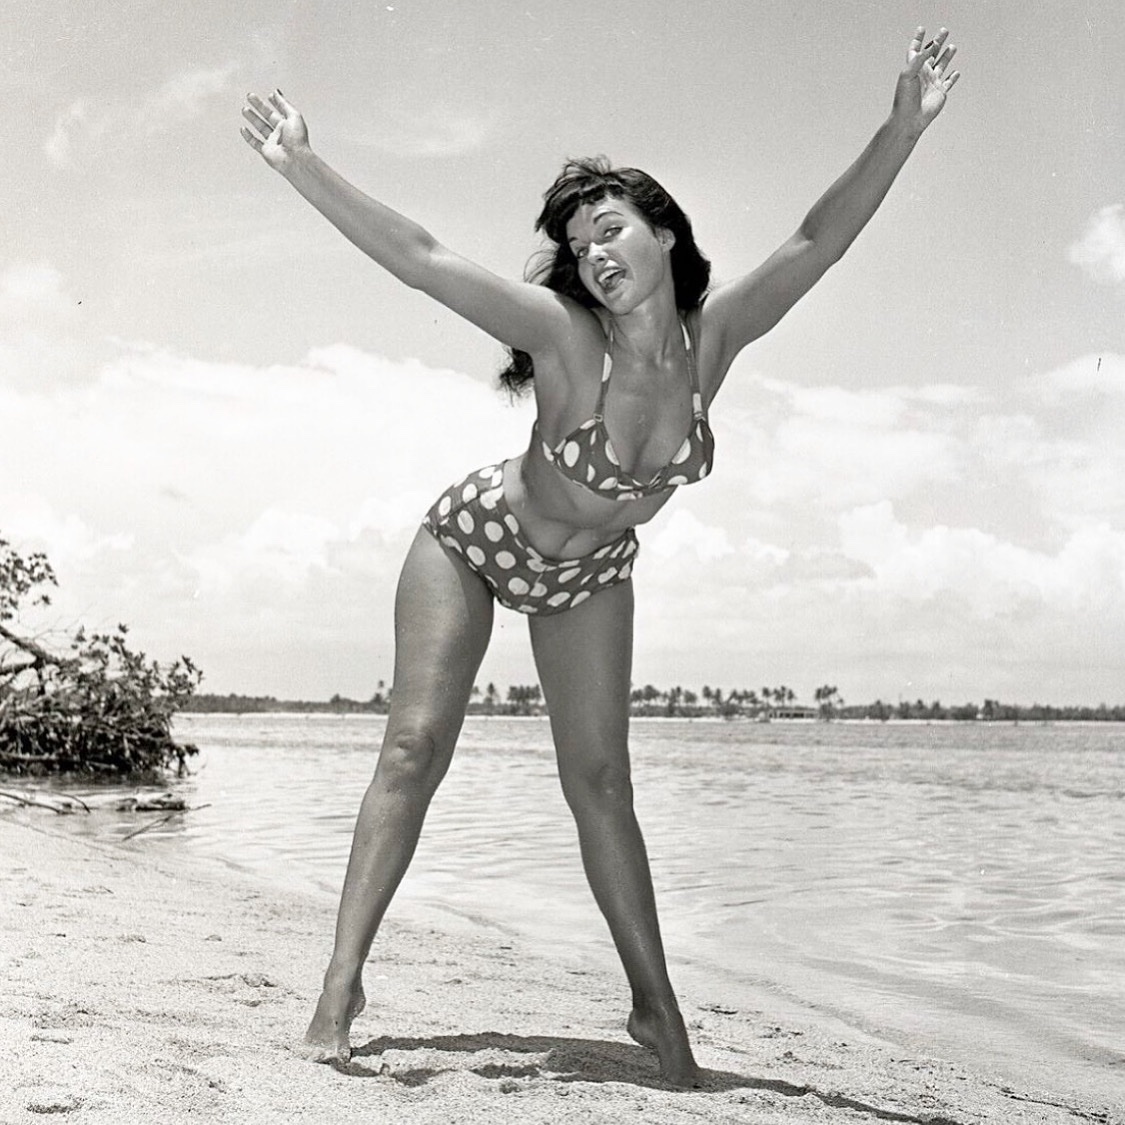 🤗Big hugs from Bettie for all you amazing daddios! 💞 Happy Father’s Day!! 💋😘

#pinup #bettiepage #bunnyyeager #1950s #pinupstyle #beachbettie